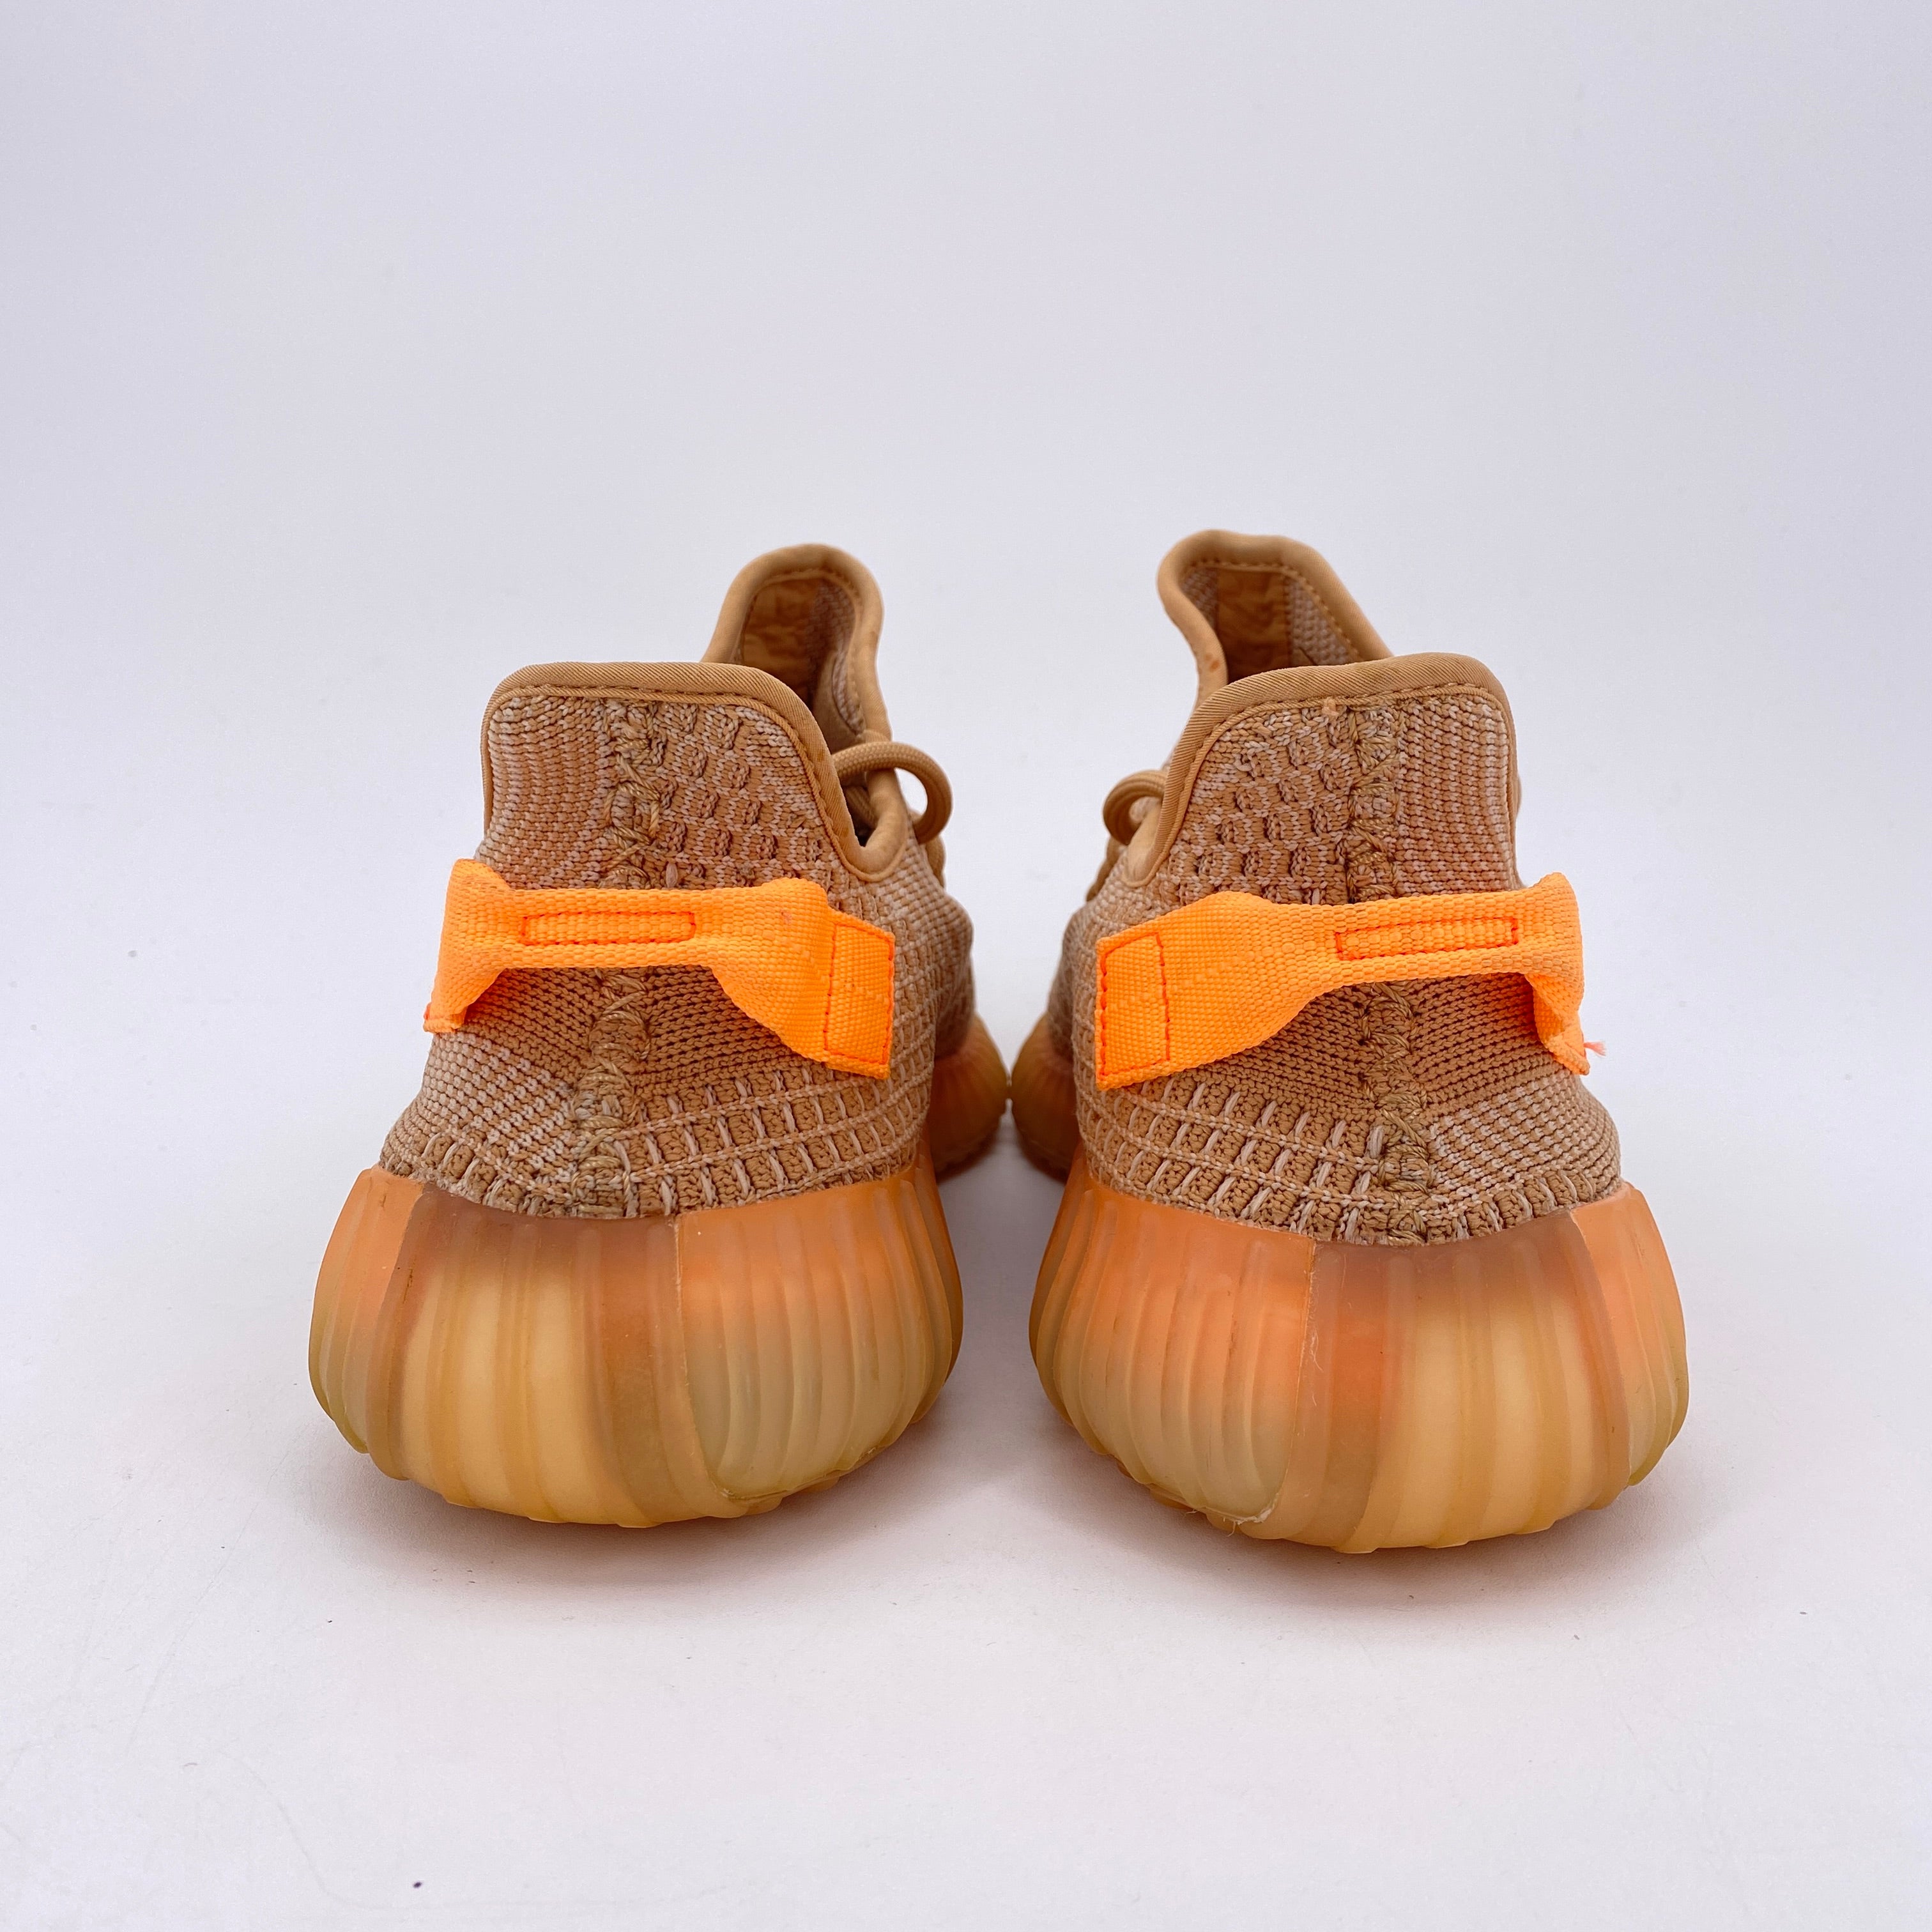 Yeezy 350 v2 &quot;Clay&quot; 2019 Used Size 9